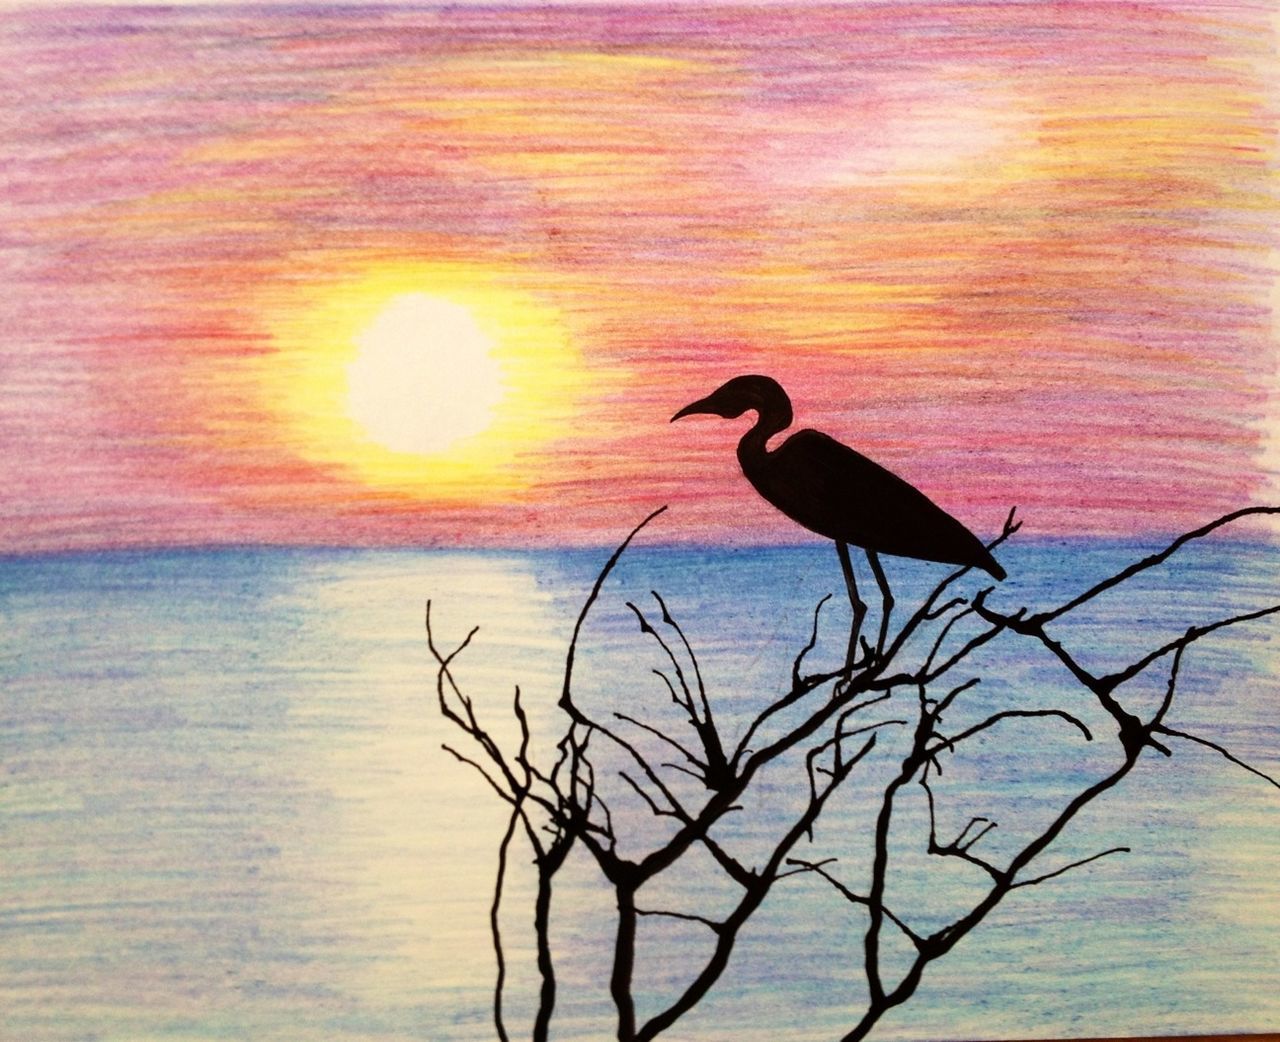 bird, animal themes, animals in the wild, wildlife, perching, one animal, sunset, branch, silhouette, bare tree, nature, orange color, beauty in nature, full length, water, tree, tranquility, outdoors, no people, lake